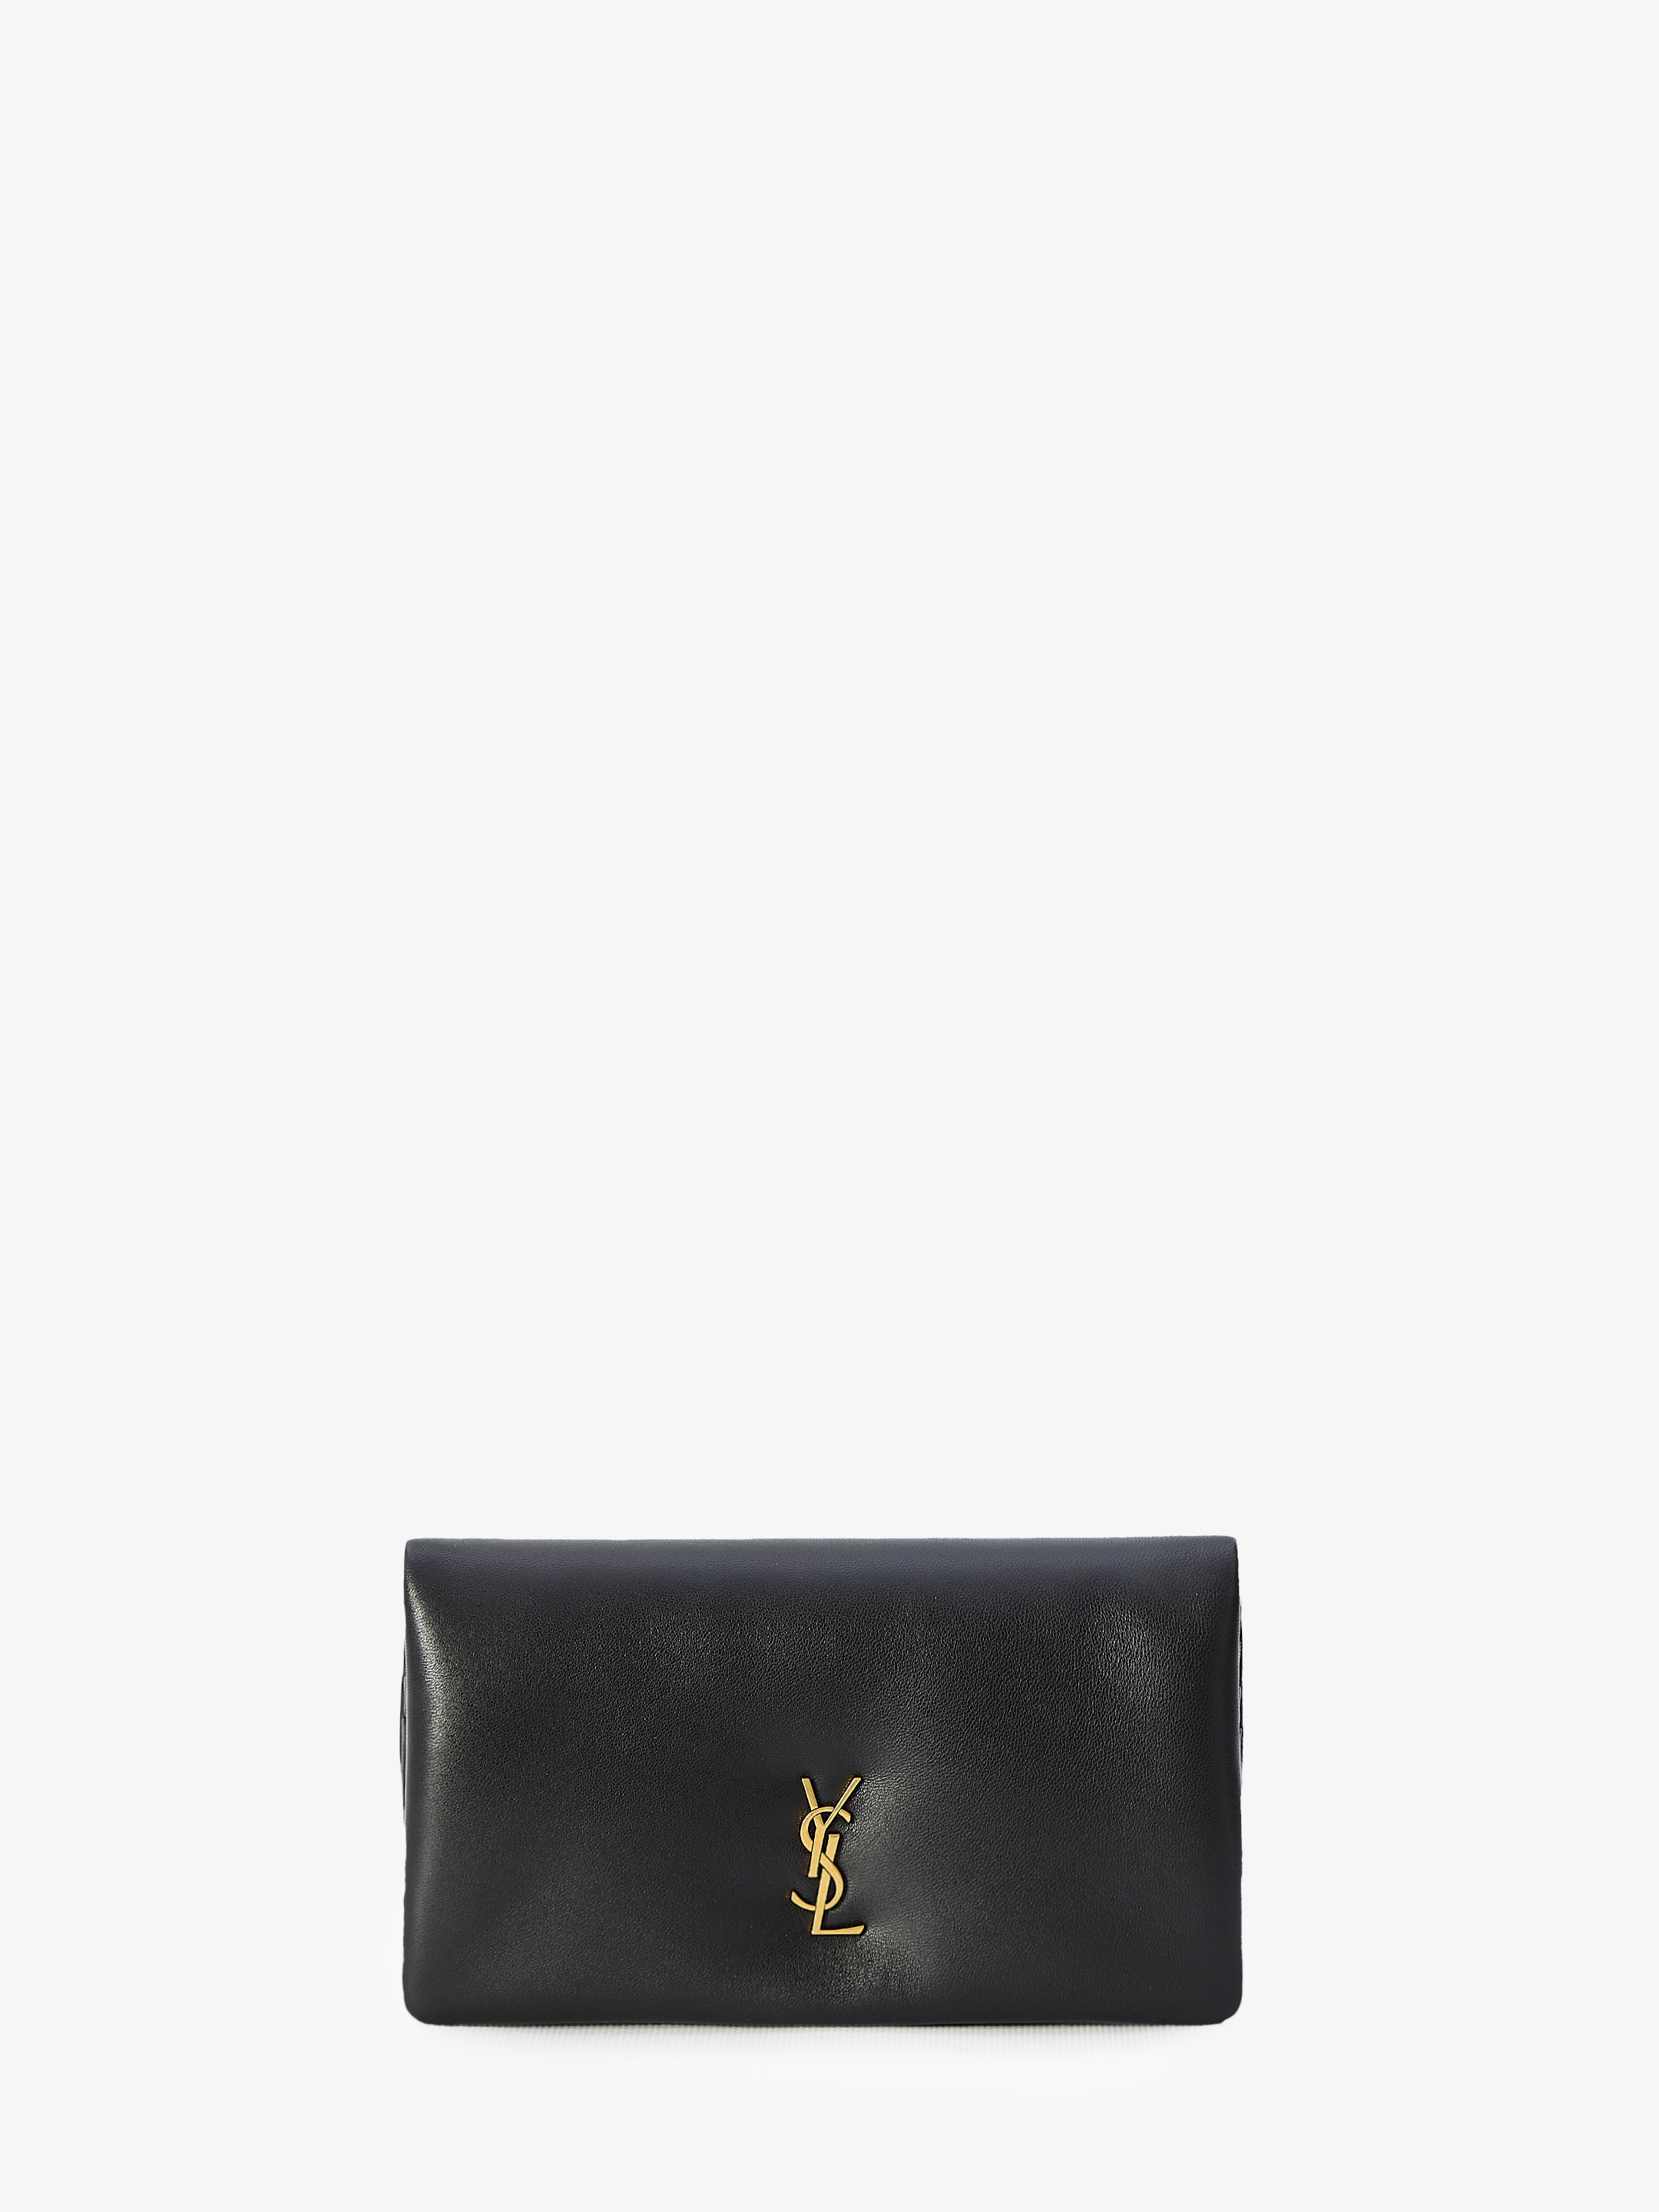 SAINT LAURENT - Pouch with chain | Leam Roma - Luxury Shopping Online